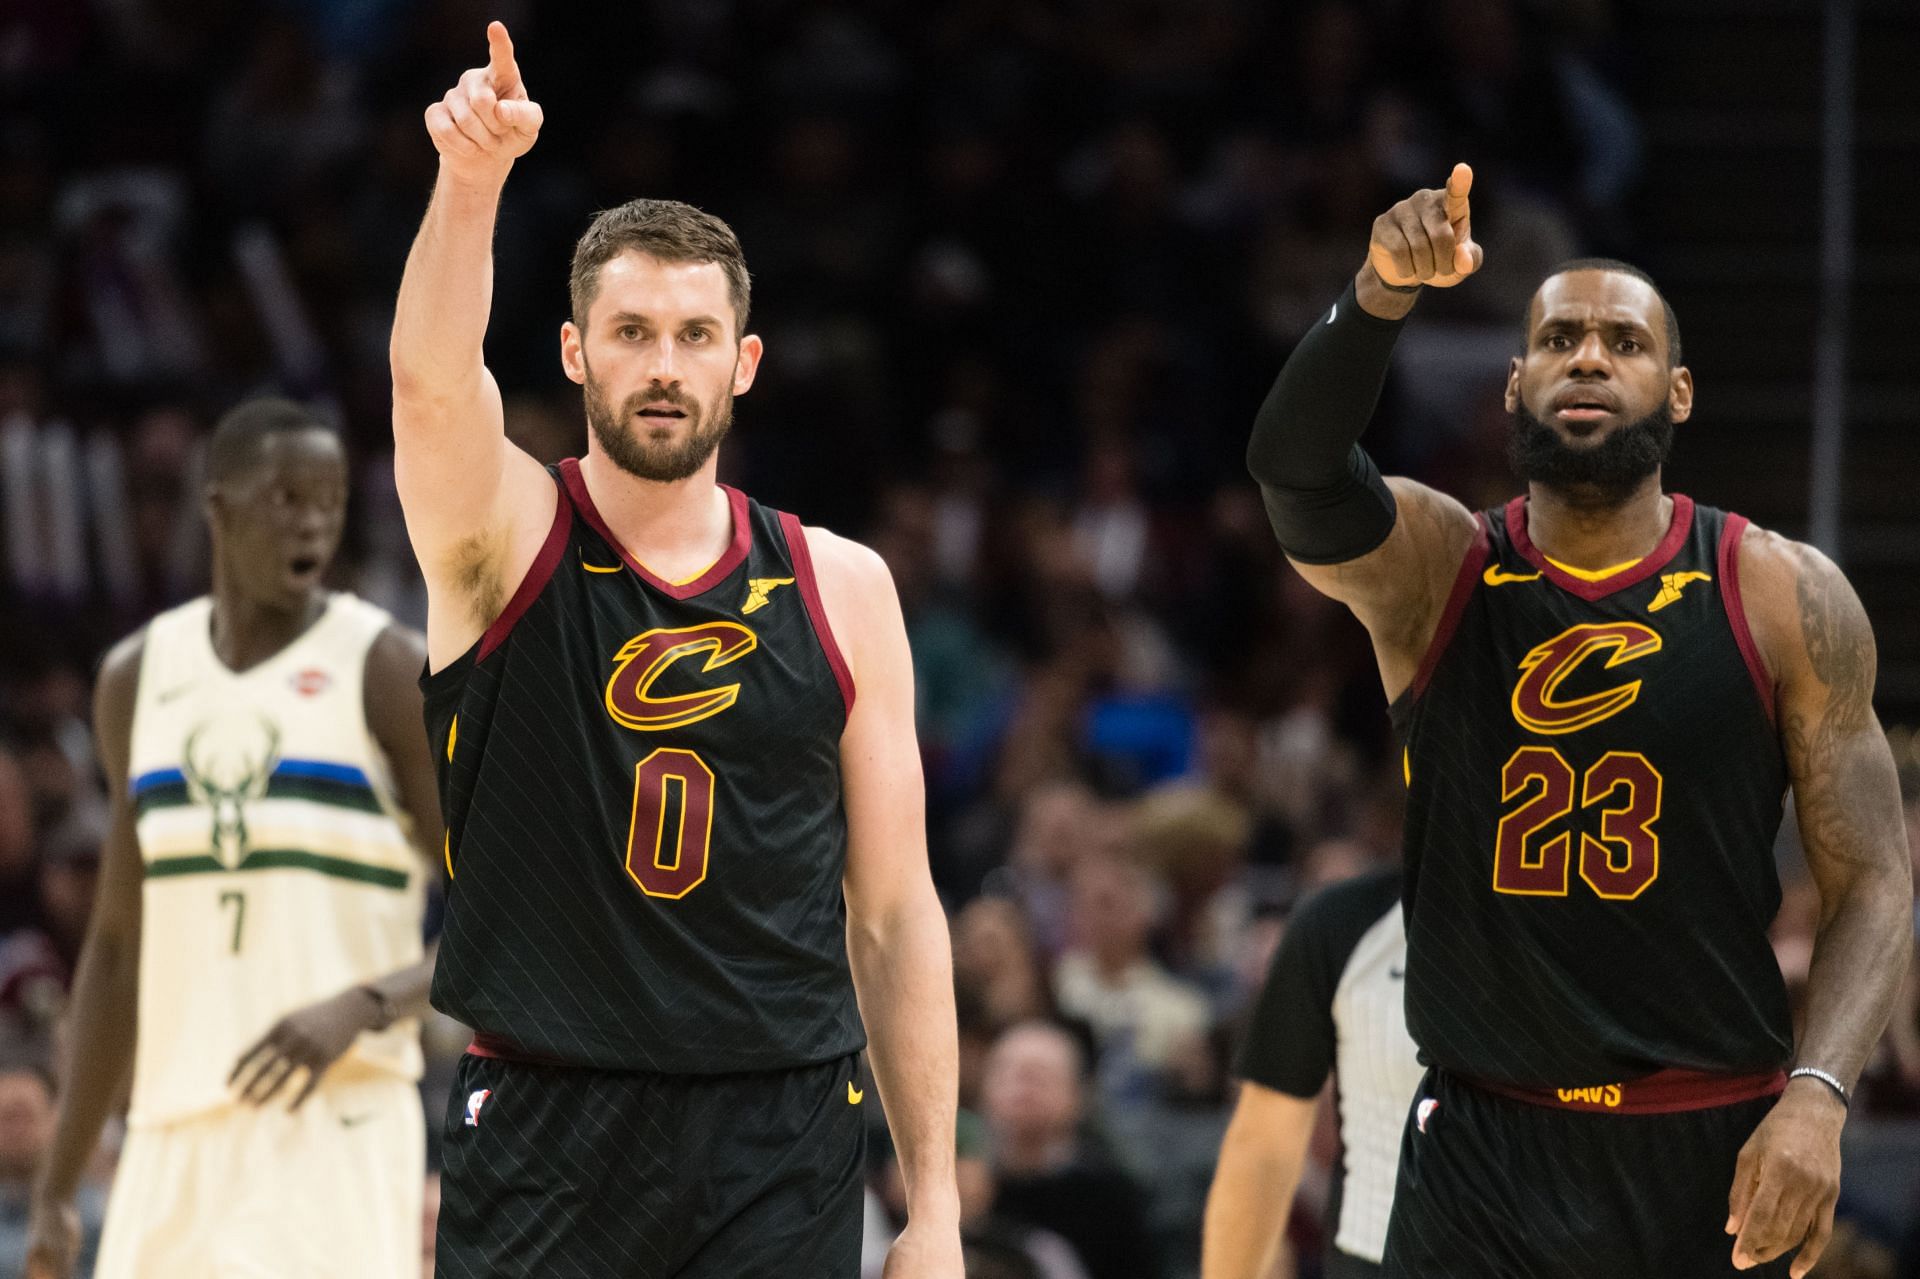 LeBron James (right) and Kevin Love (left) on the Cleveland Cavaliers